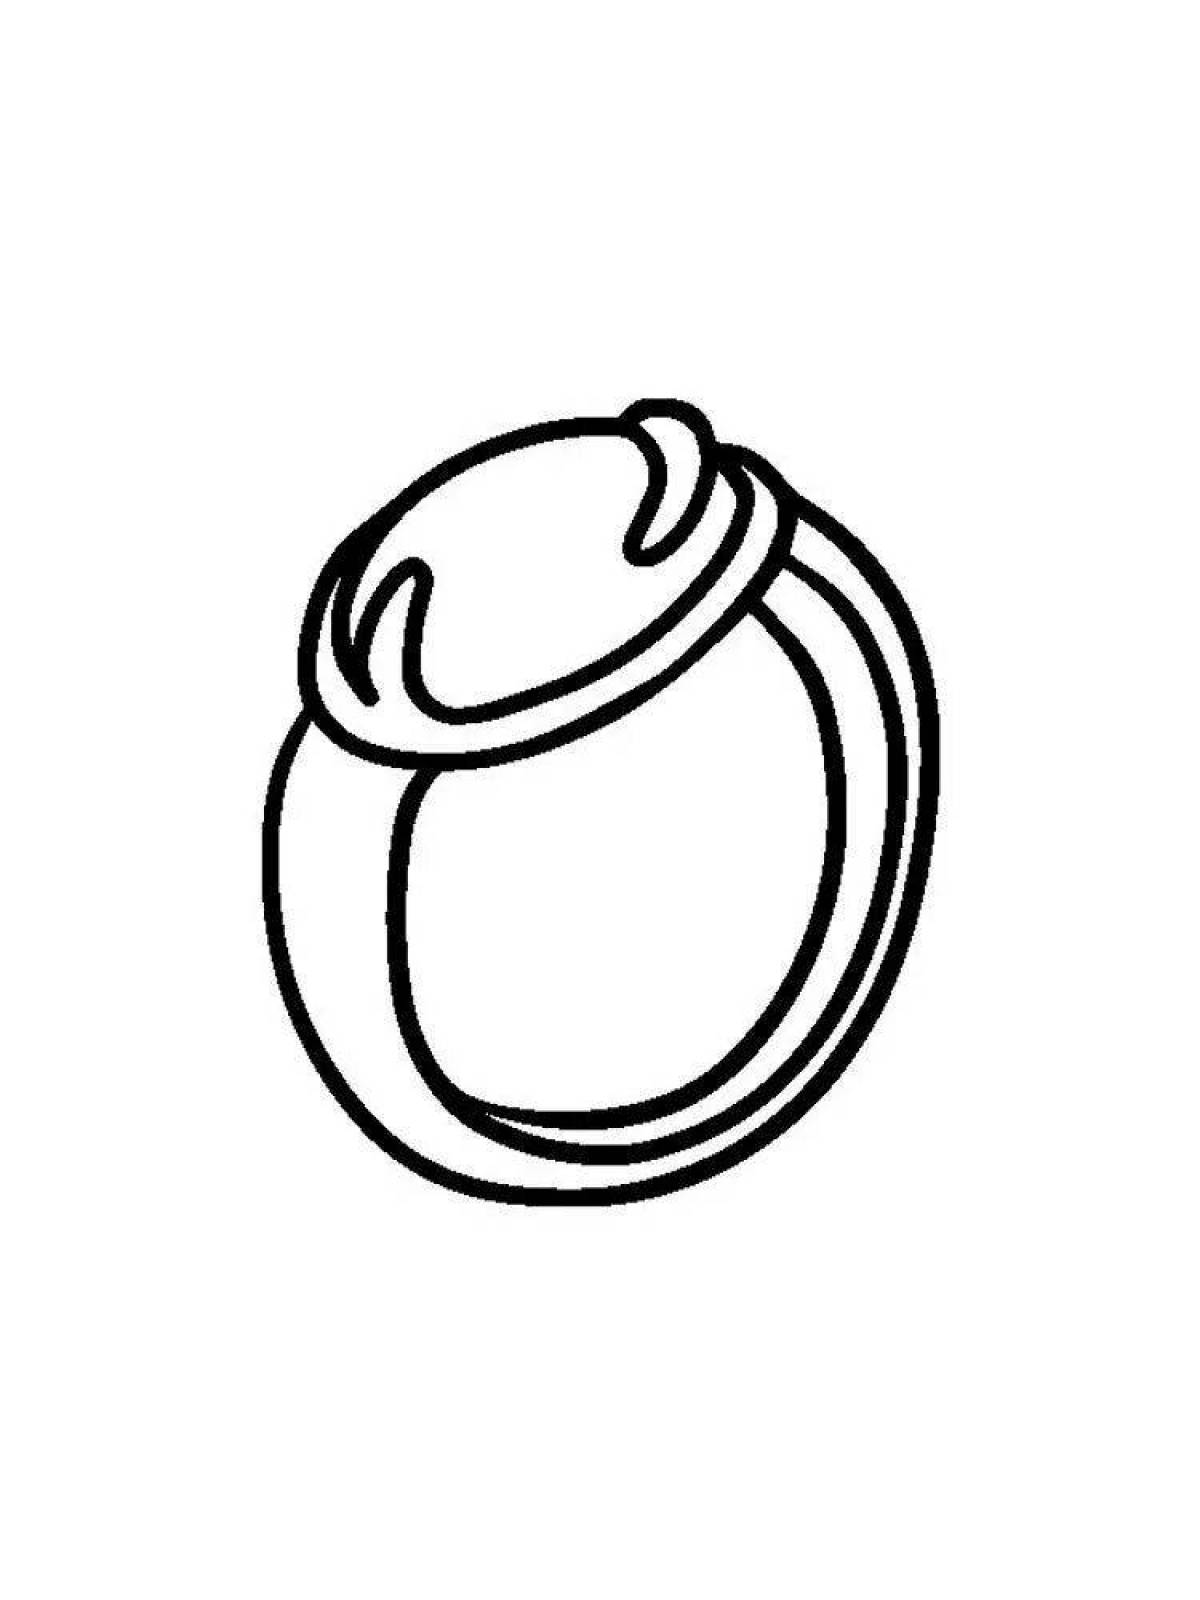 Fancy ring coloring page